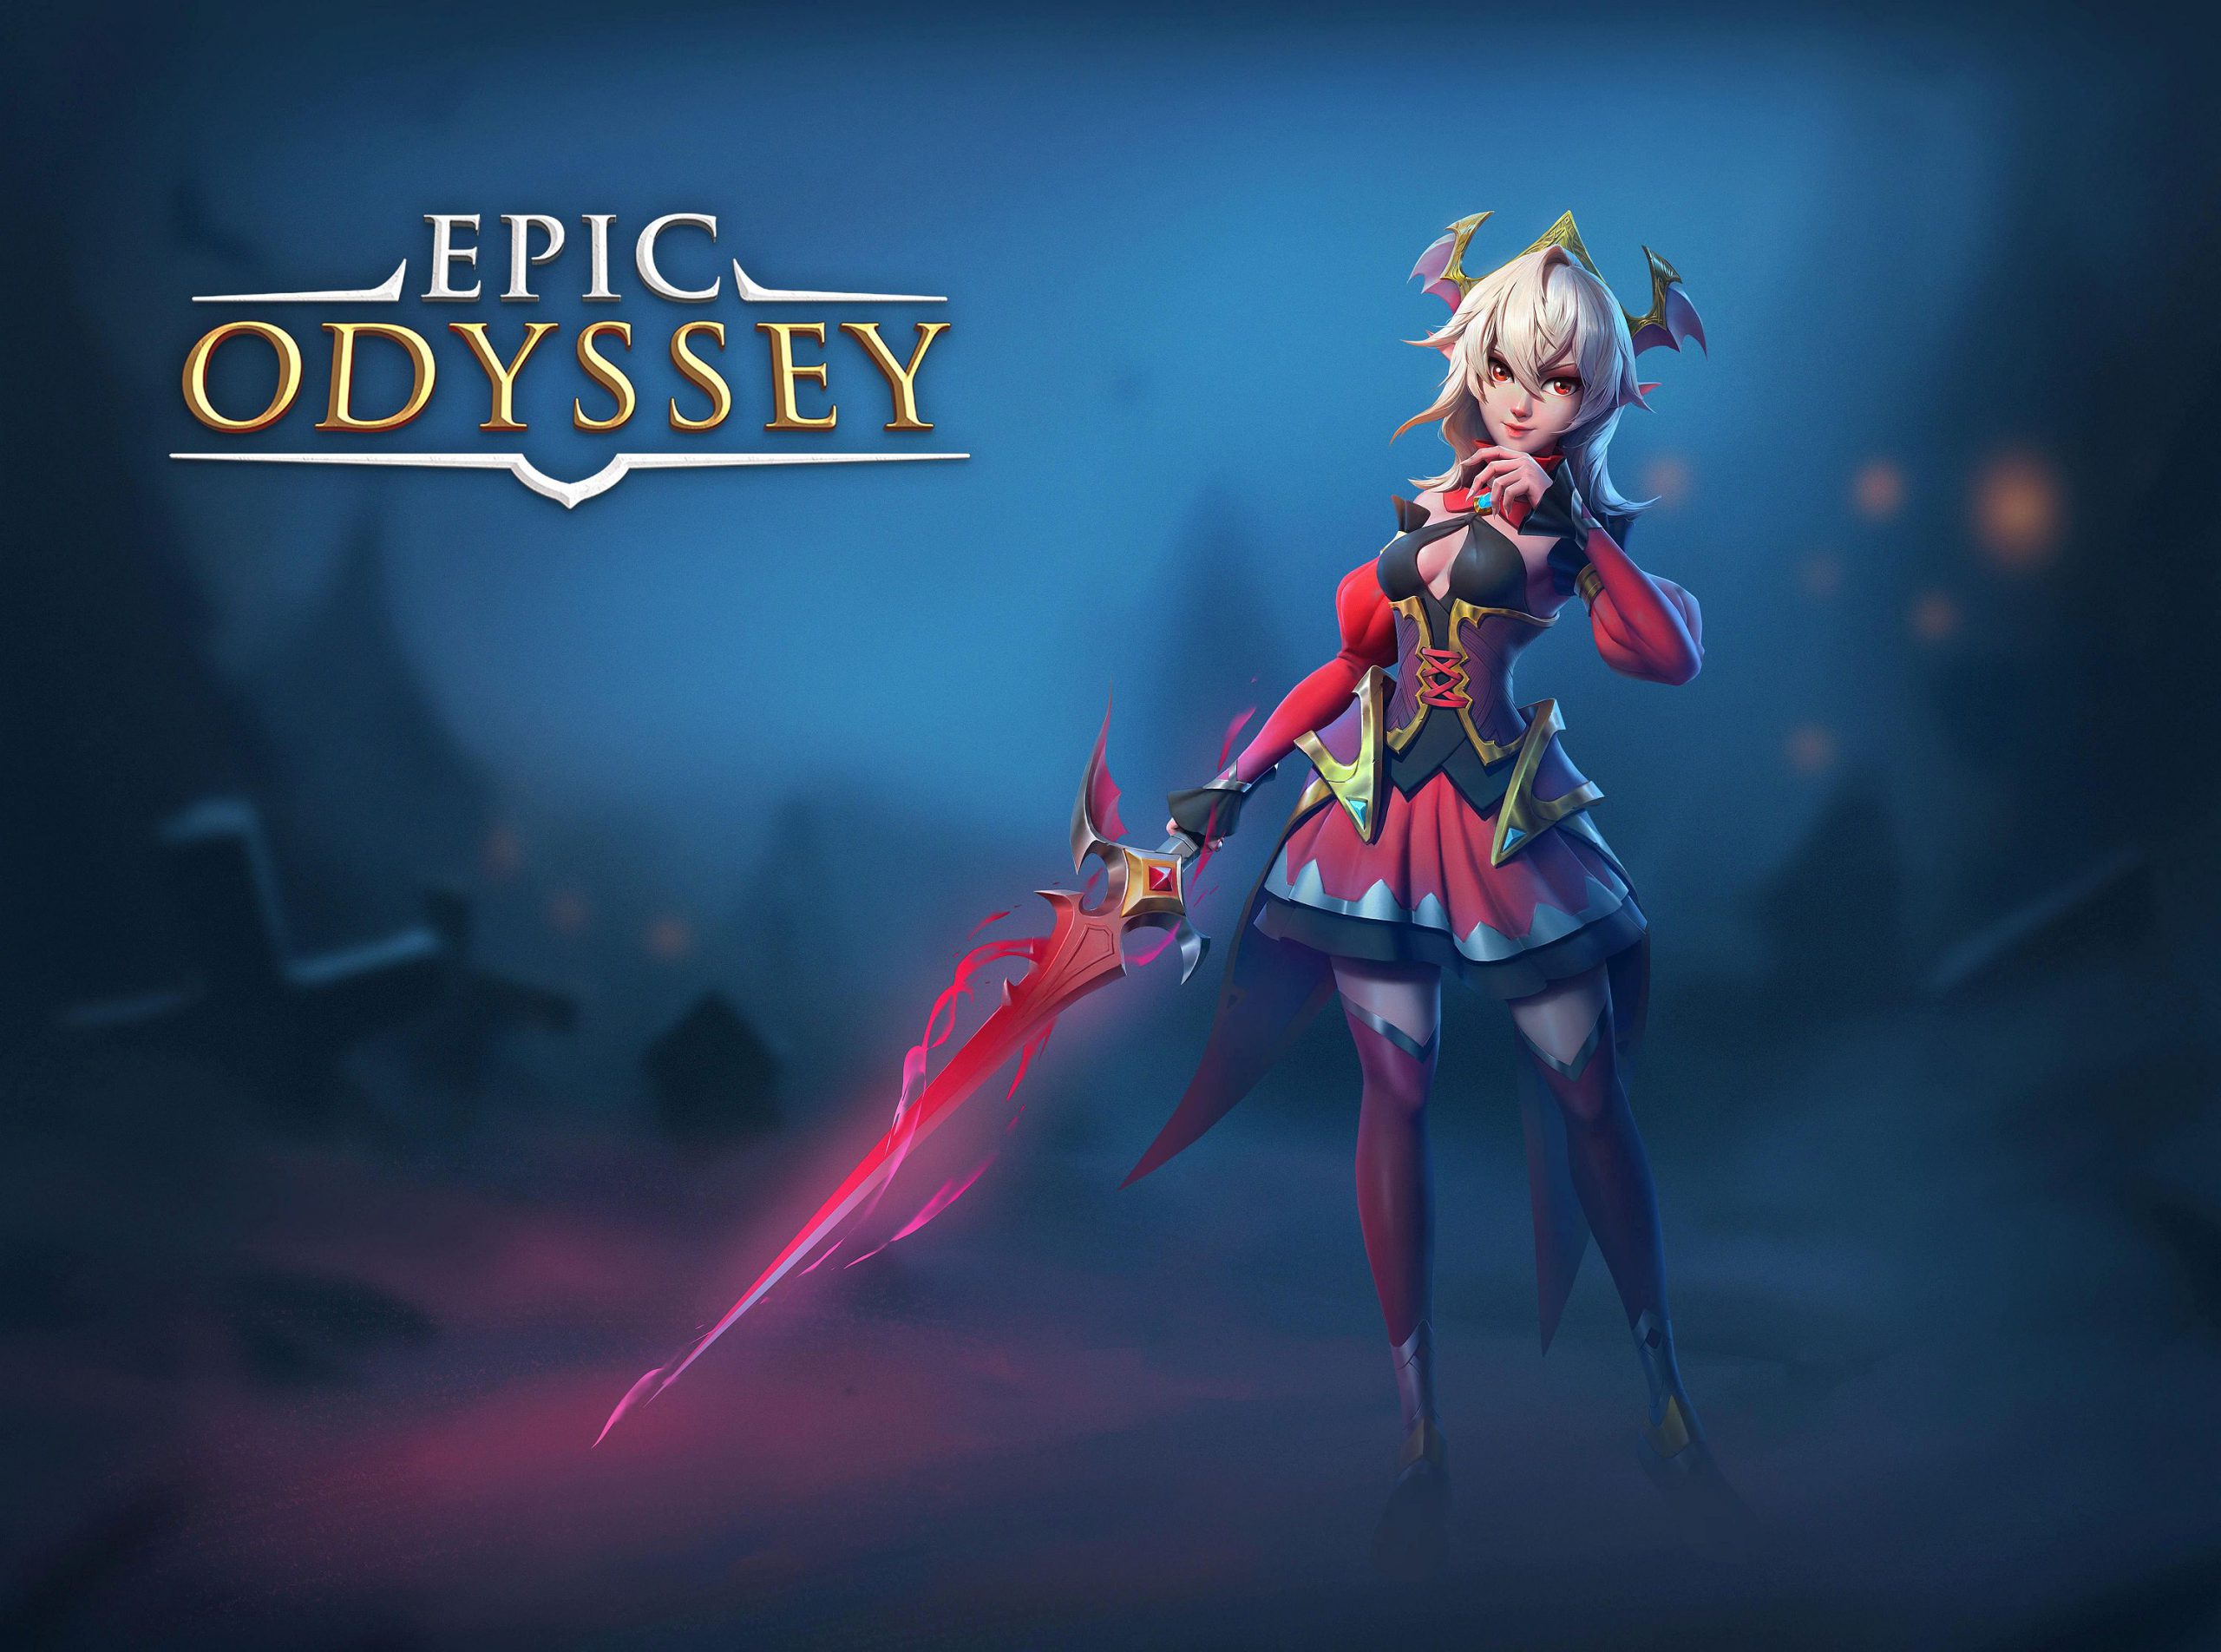 Epic Odyssey Walkthrough: A Beginners’ Guide to Heroes, Gear, and More